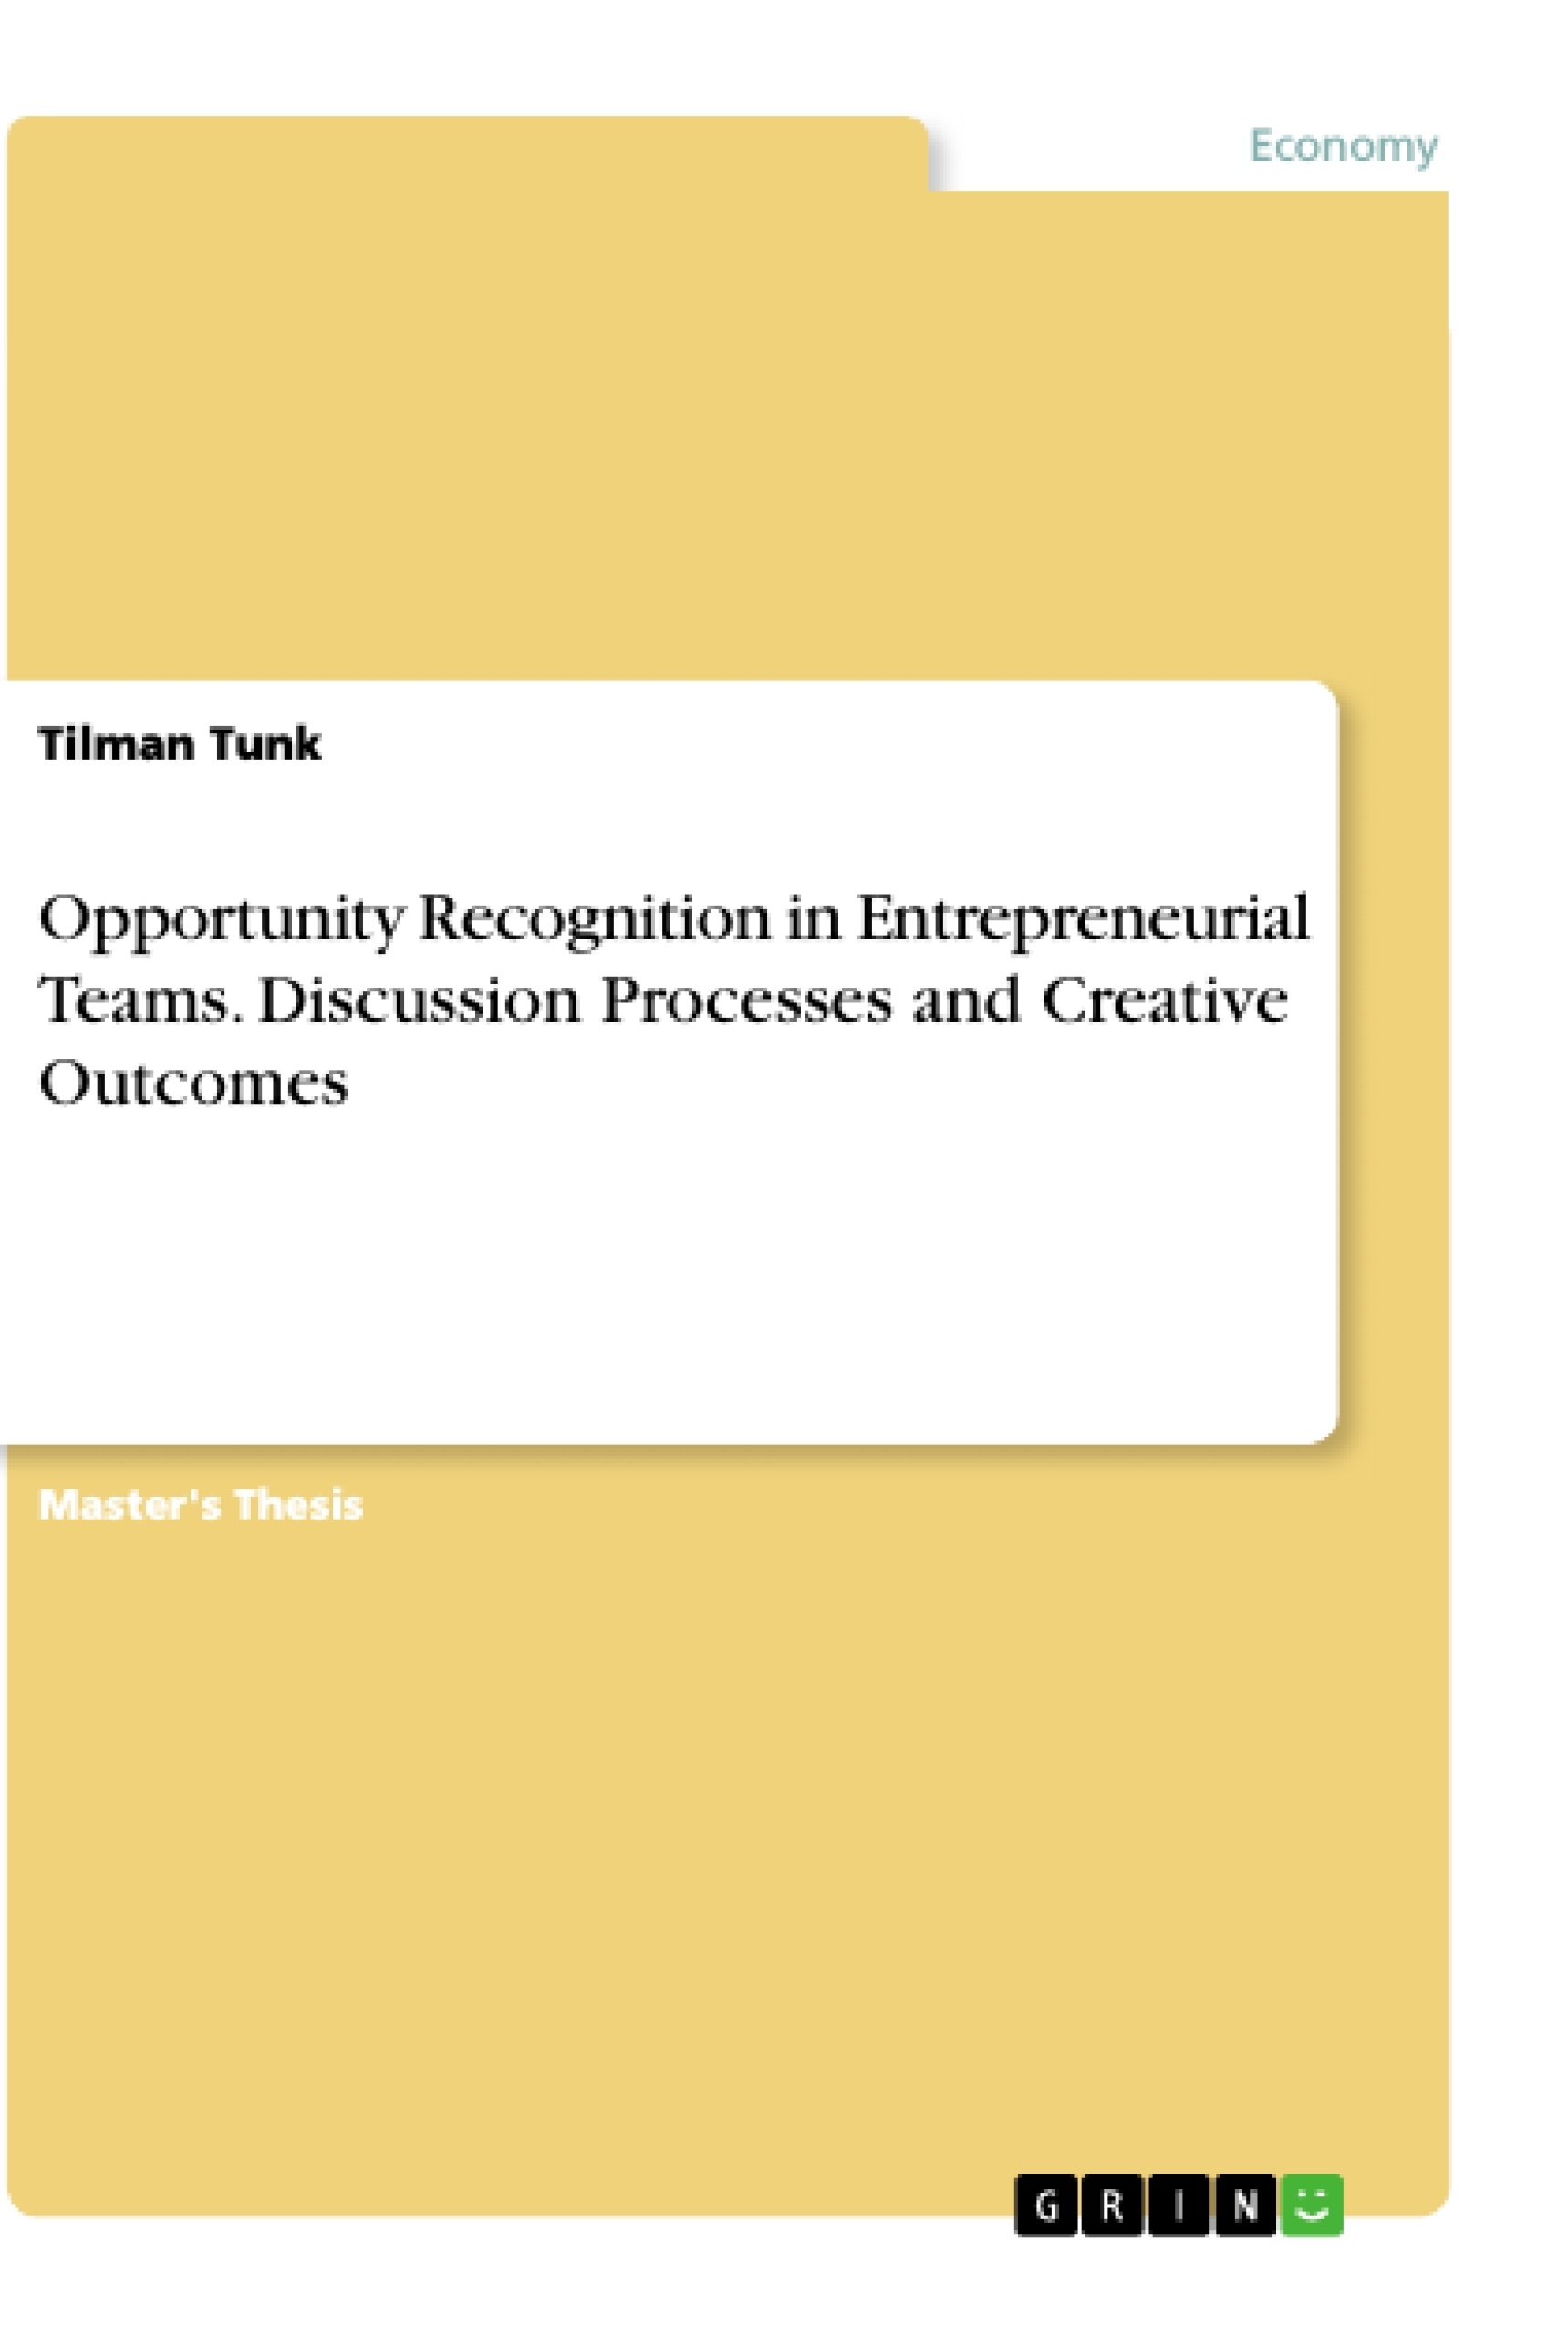 Titre: Opportunity Recognition in Entrepreneurial Teams. Discussion Processes and Creative Outcomes